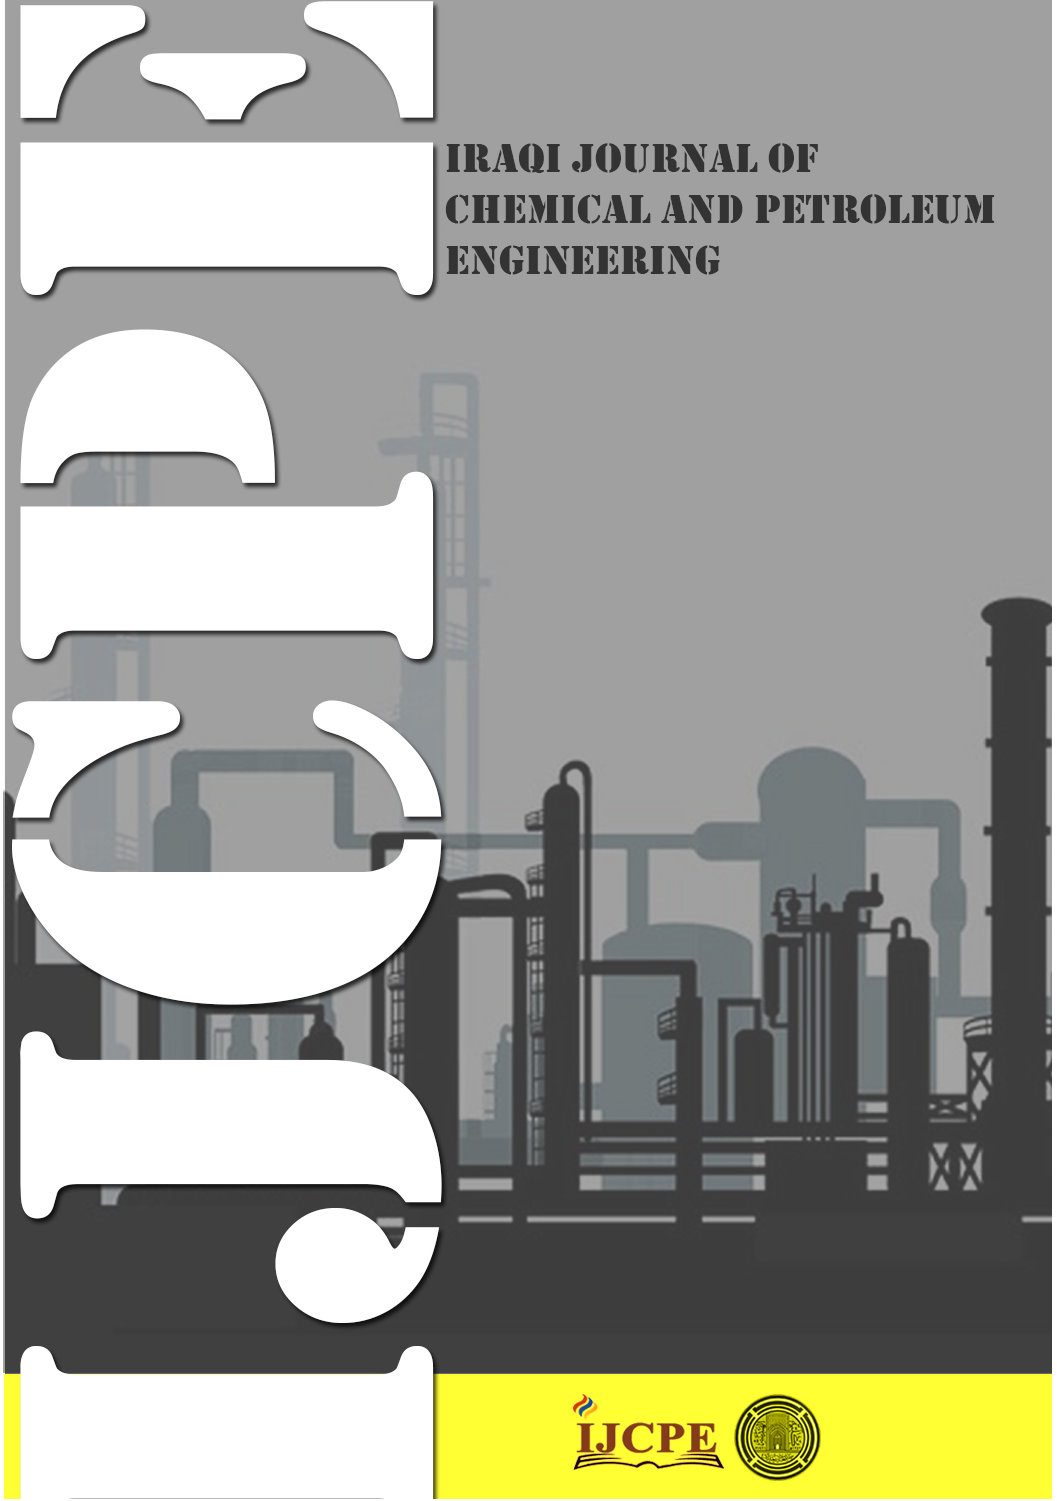 Iraqi Journal of Chemical and Petroleum Engineering